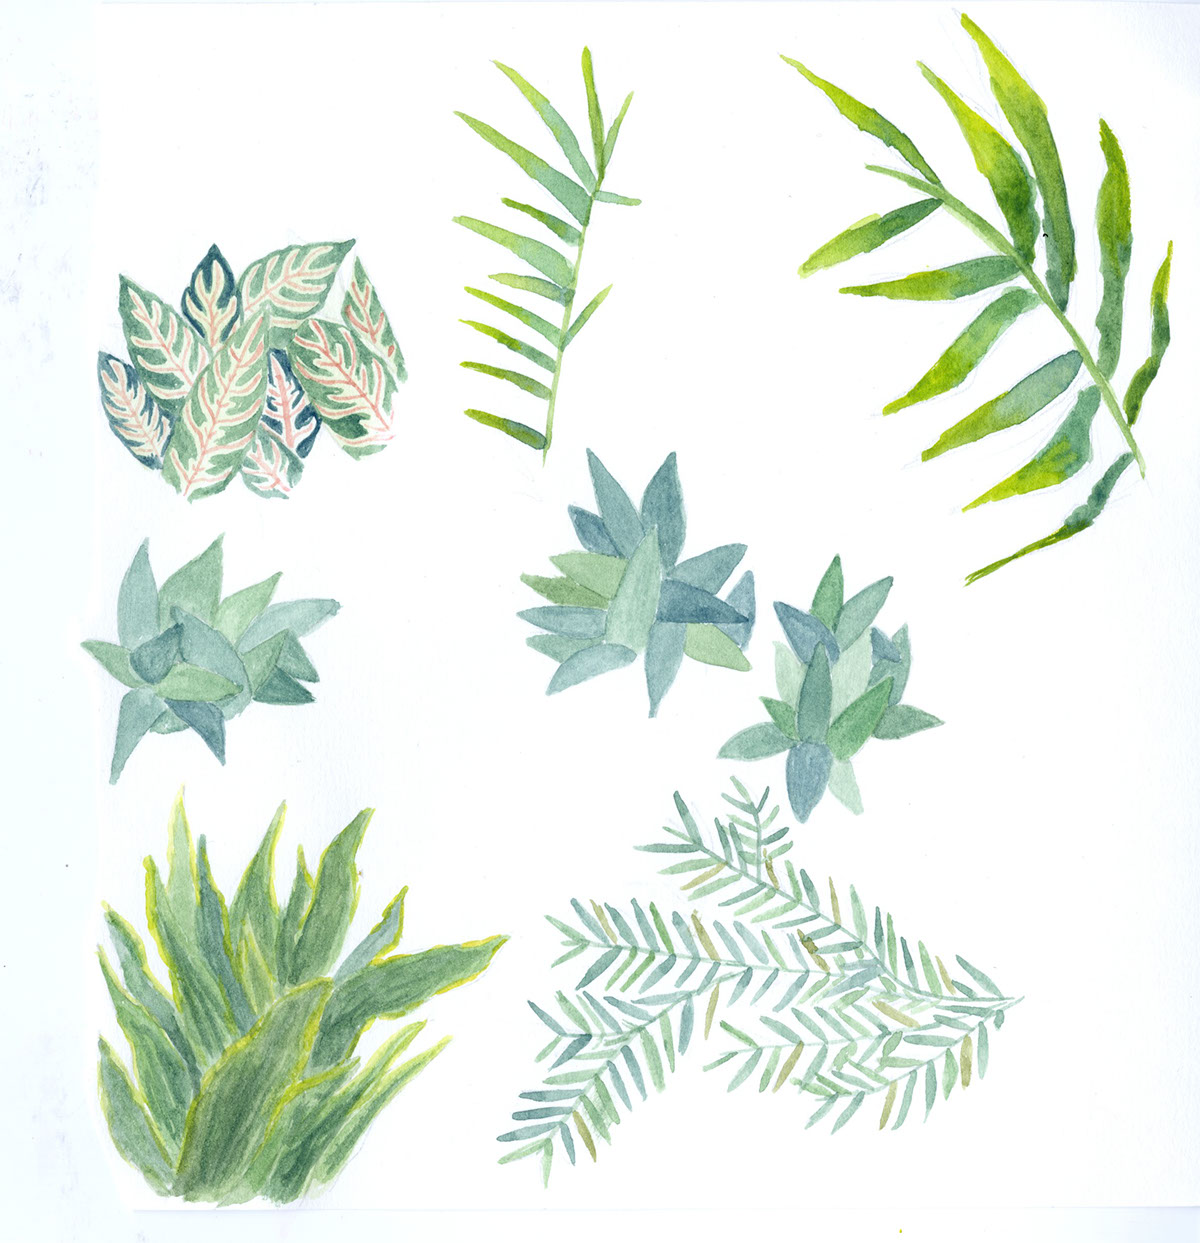 Nature sketchbook Watercolours observational drawing leaves leaf study